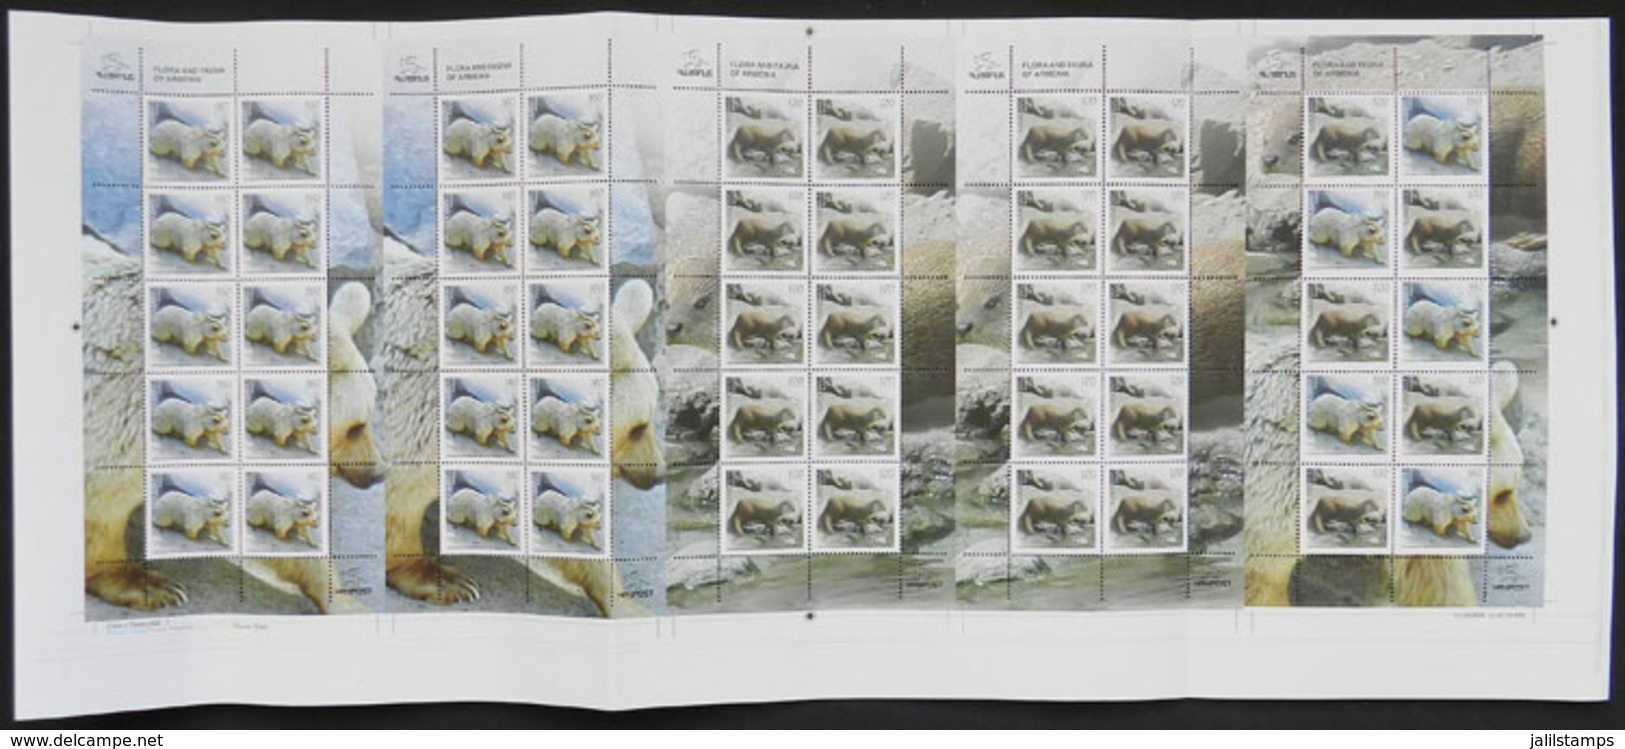 ARMENIA: Sc.811/812 - 812a, 2009 Animals, Large Sheet With 4 Panes Of 10 Stamps (2 Of Each Value) + The Minisheet (Sc.81 - Armenia